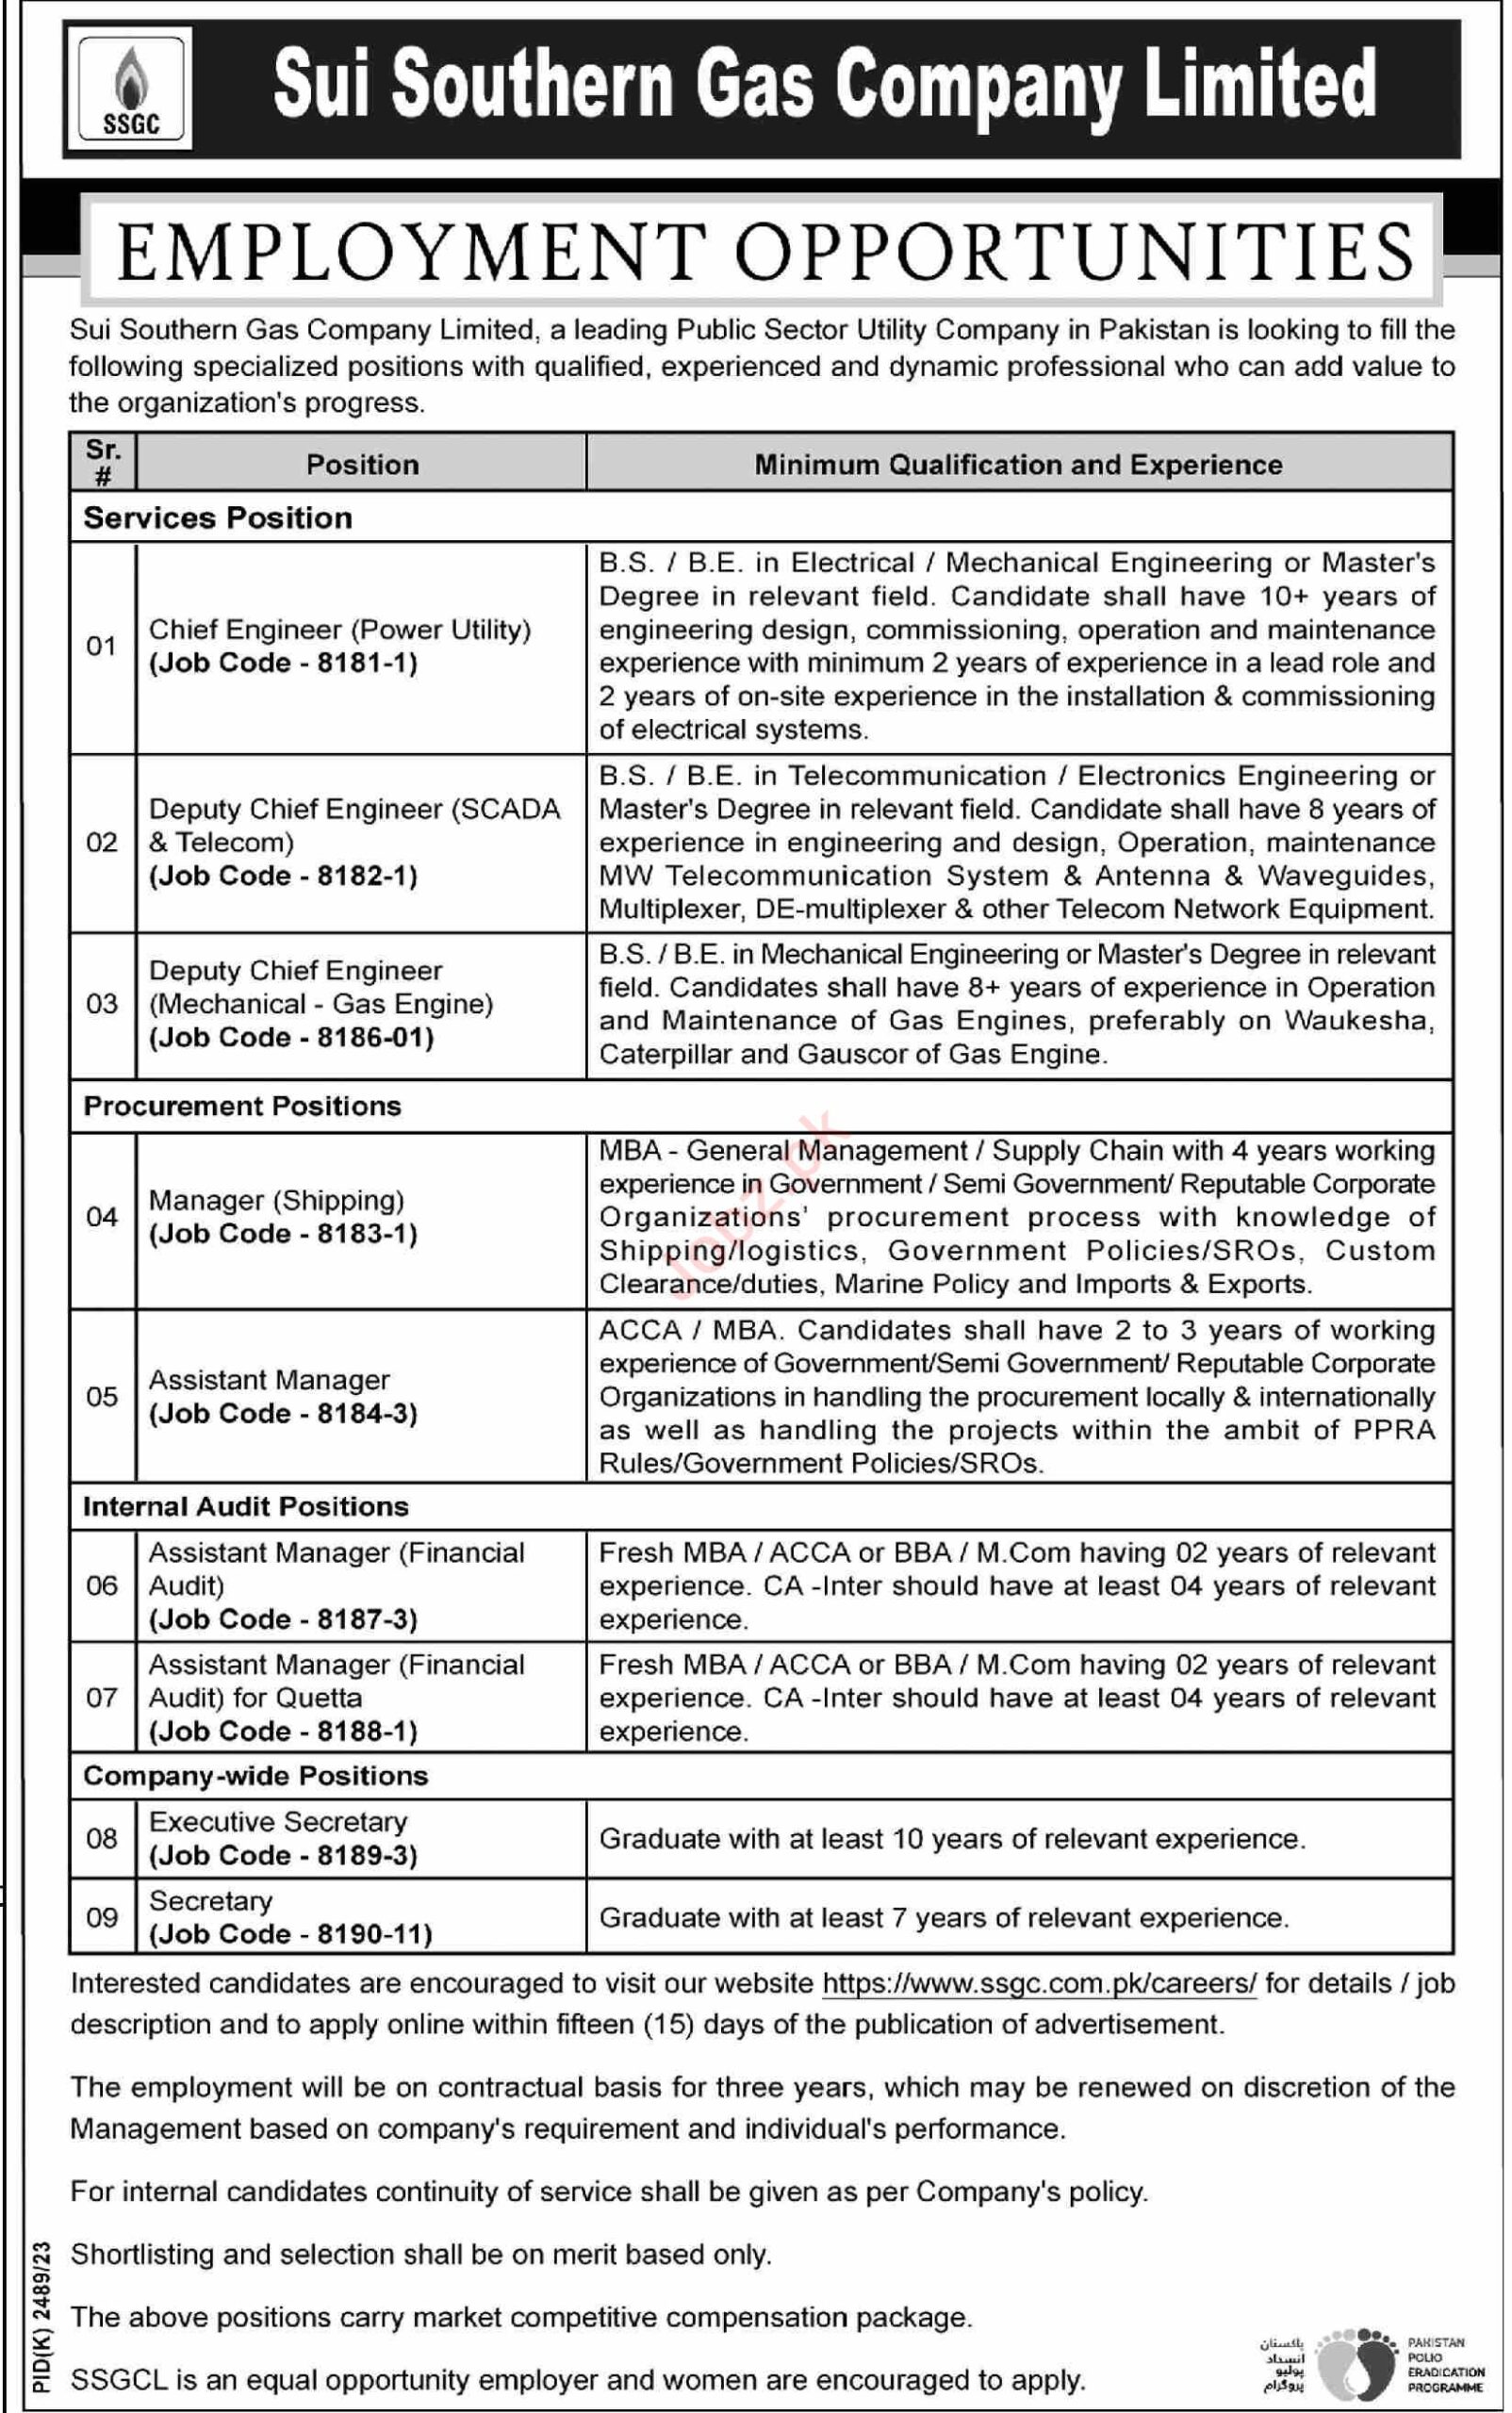 Sui Southern Gas Company Job Opportunities 2023 In Karachi